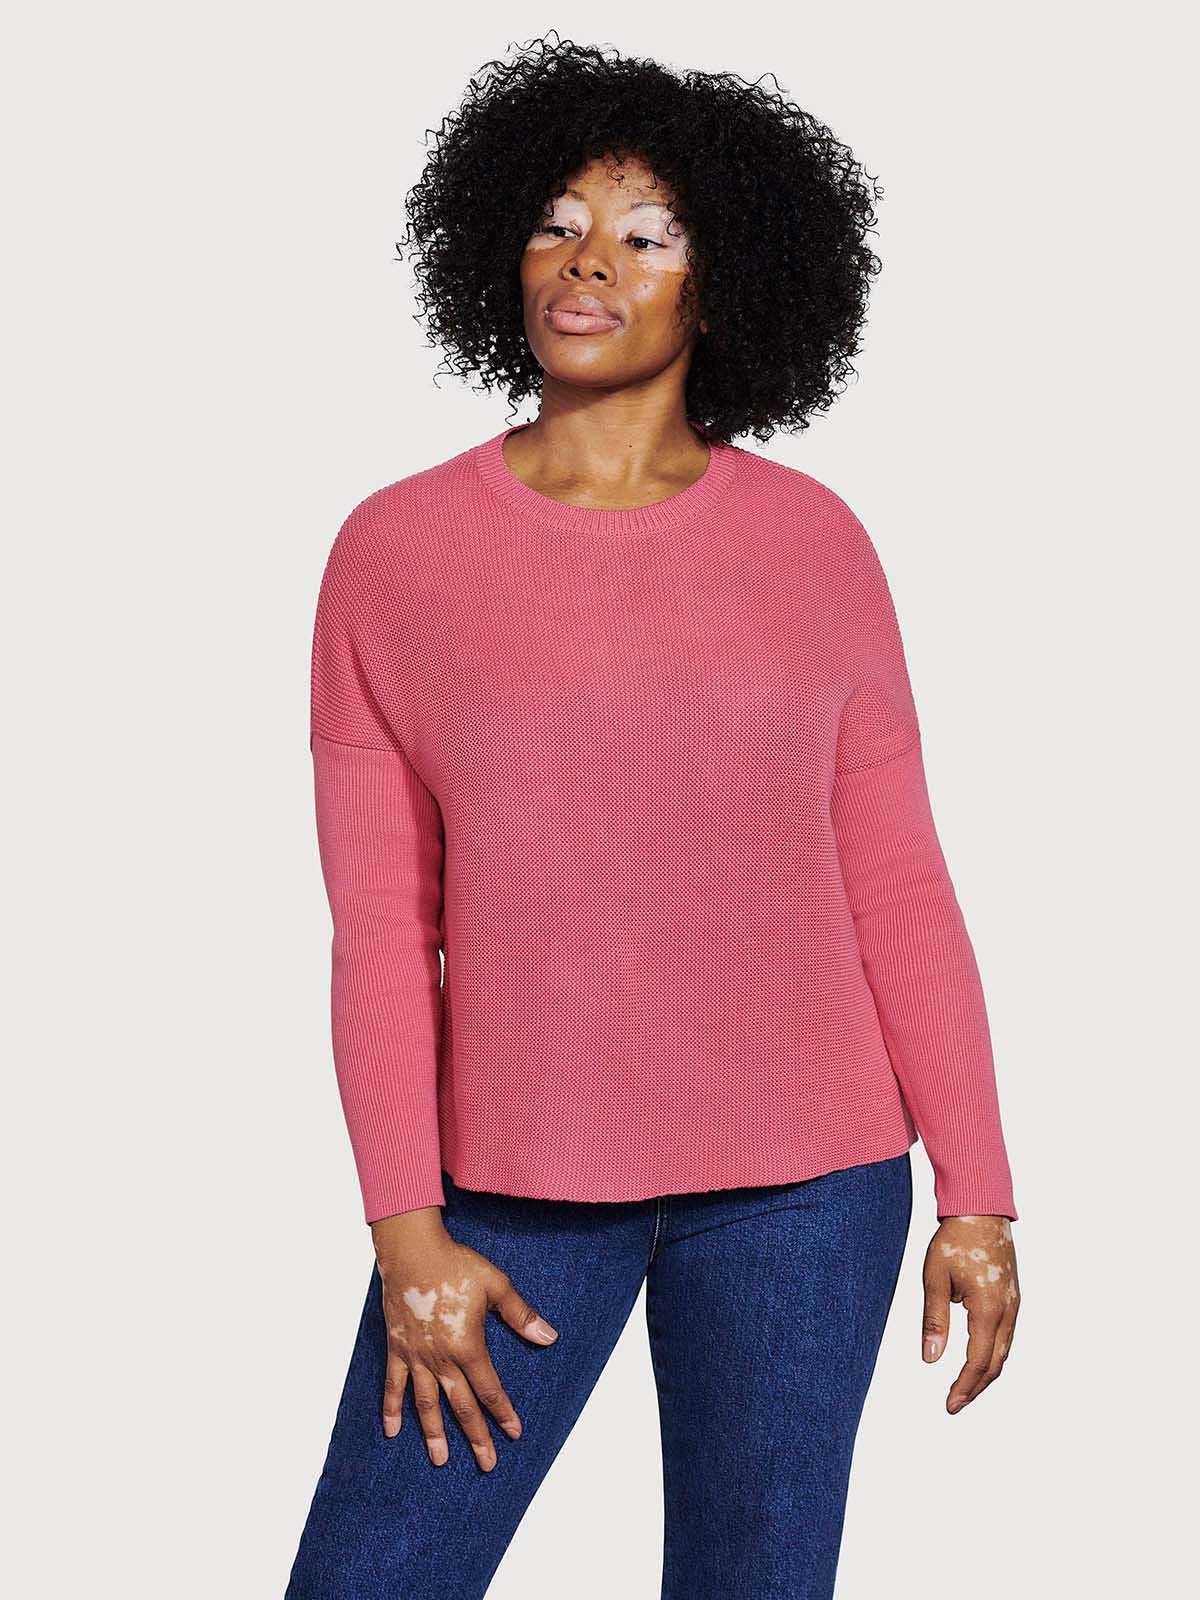 Kate GOTS & Fairtrade Organic Cotton Jumper - ROSE PINK - Thought Clothing UK